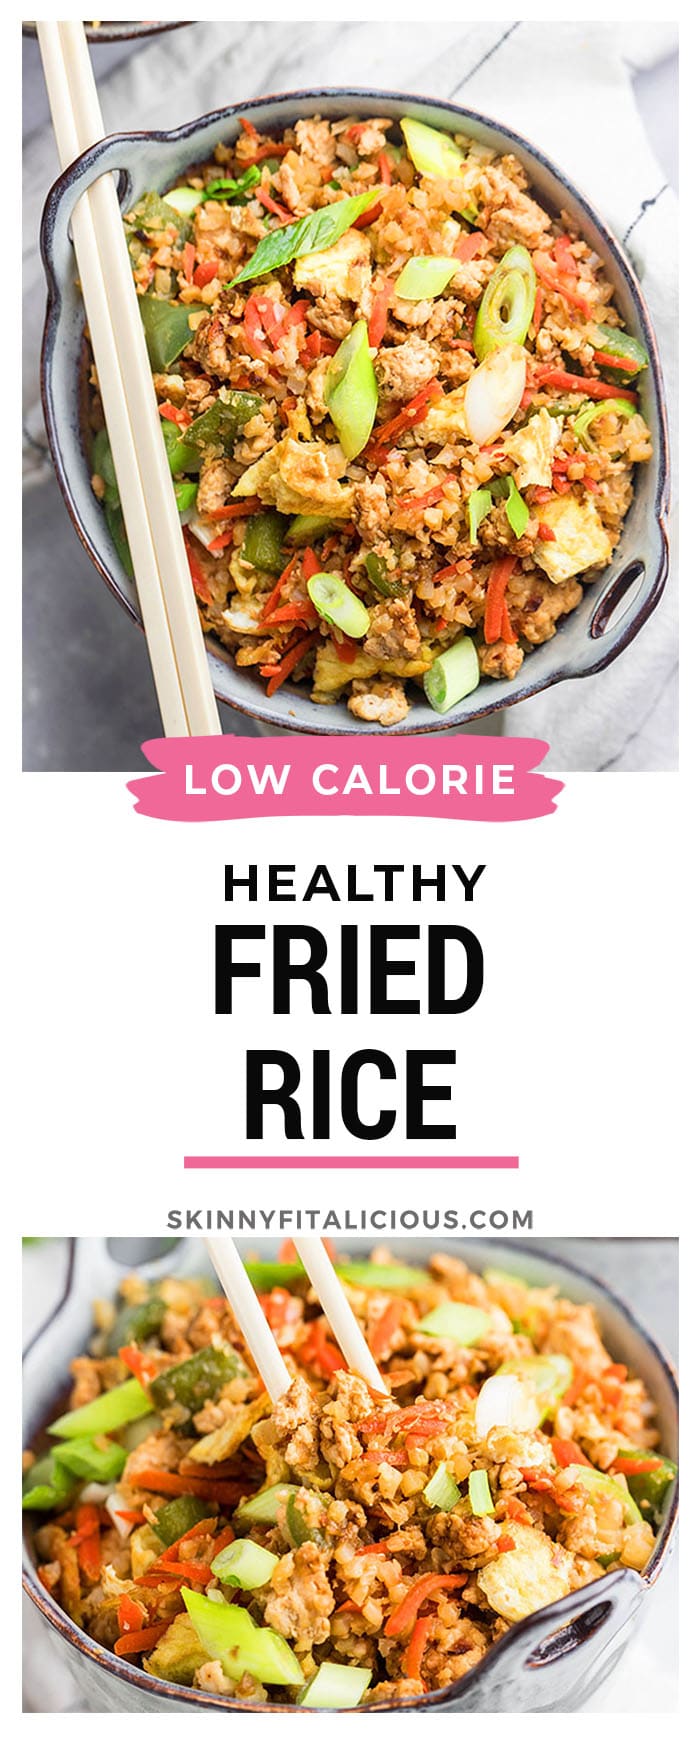 Healthy Fried Rice is protein and veggie packed, low calorie, low carb, full of flavor and so delicious! Make your own healthier takeout at home with this healthy fried rice dinner recipe!